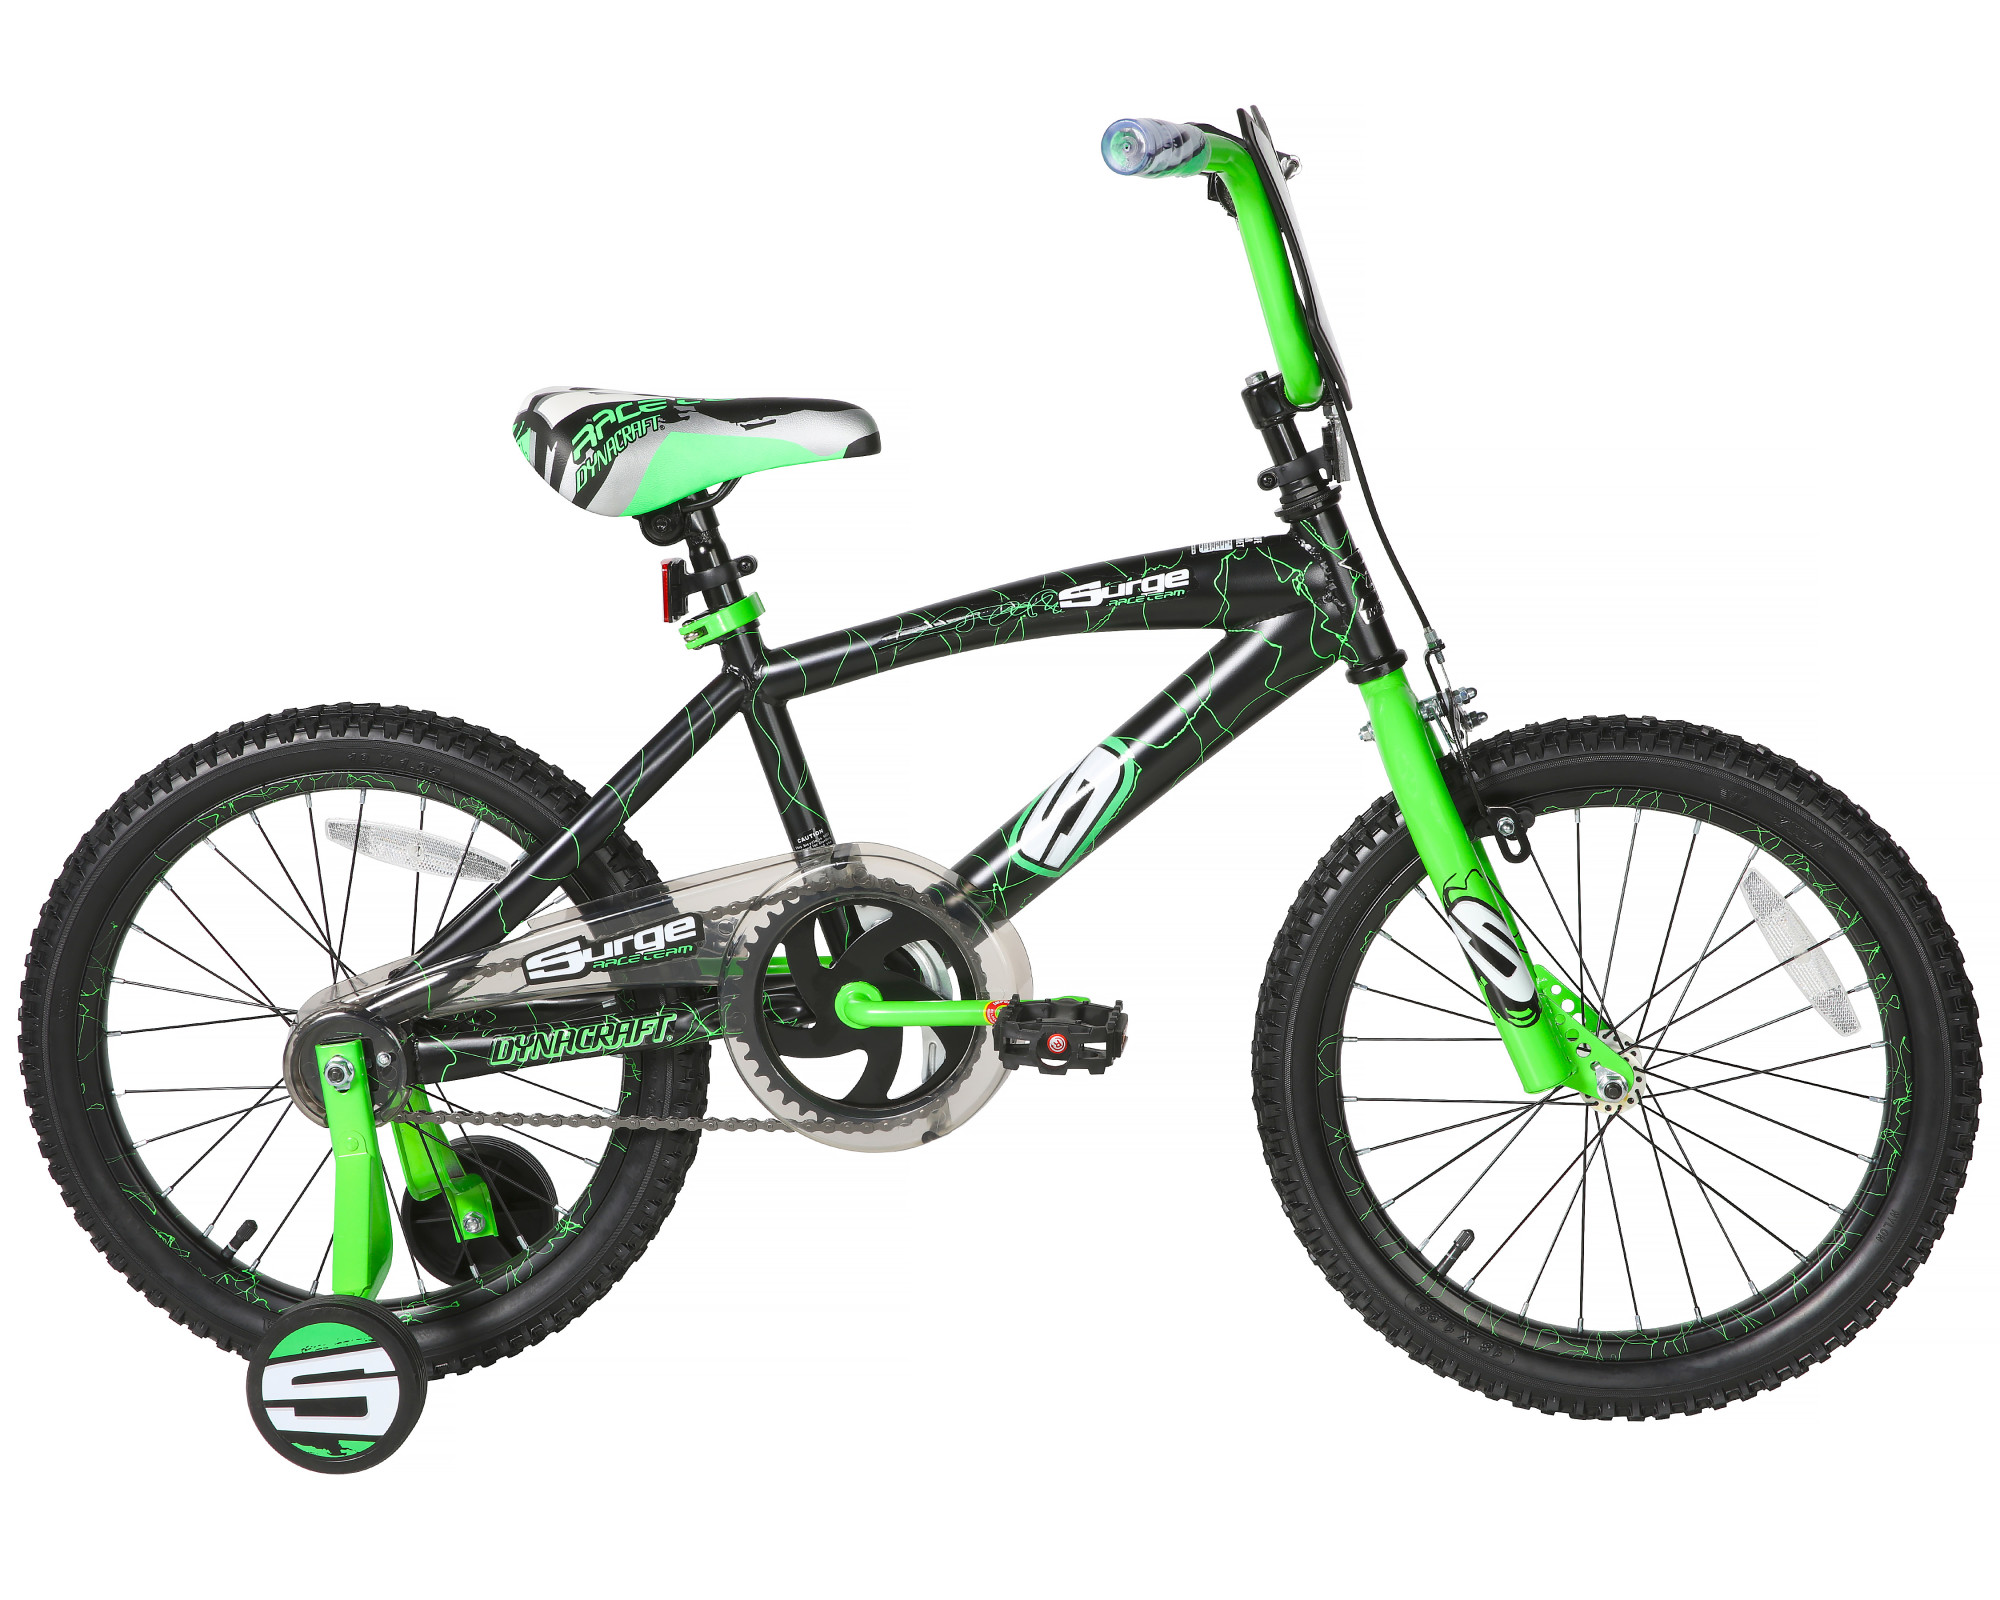 Dynacraft Surge18-inch Boys BMX Bike for Children Age 6-9 years - image 3 of 12